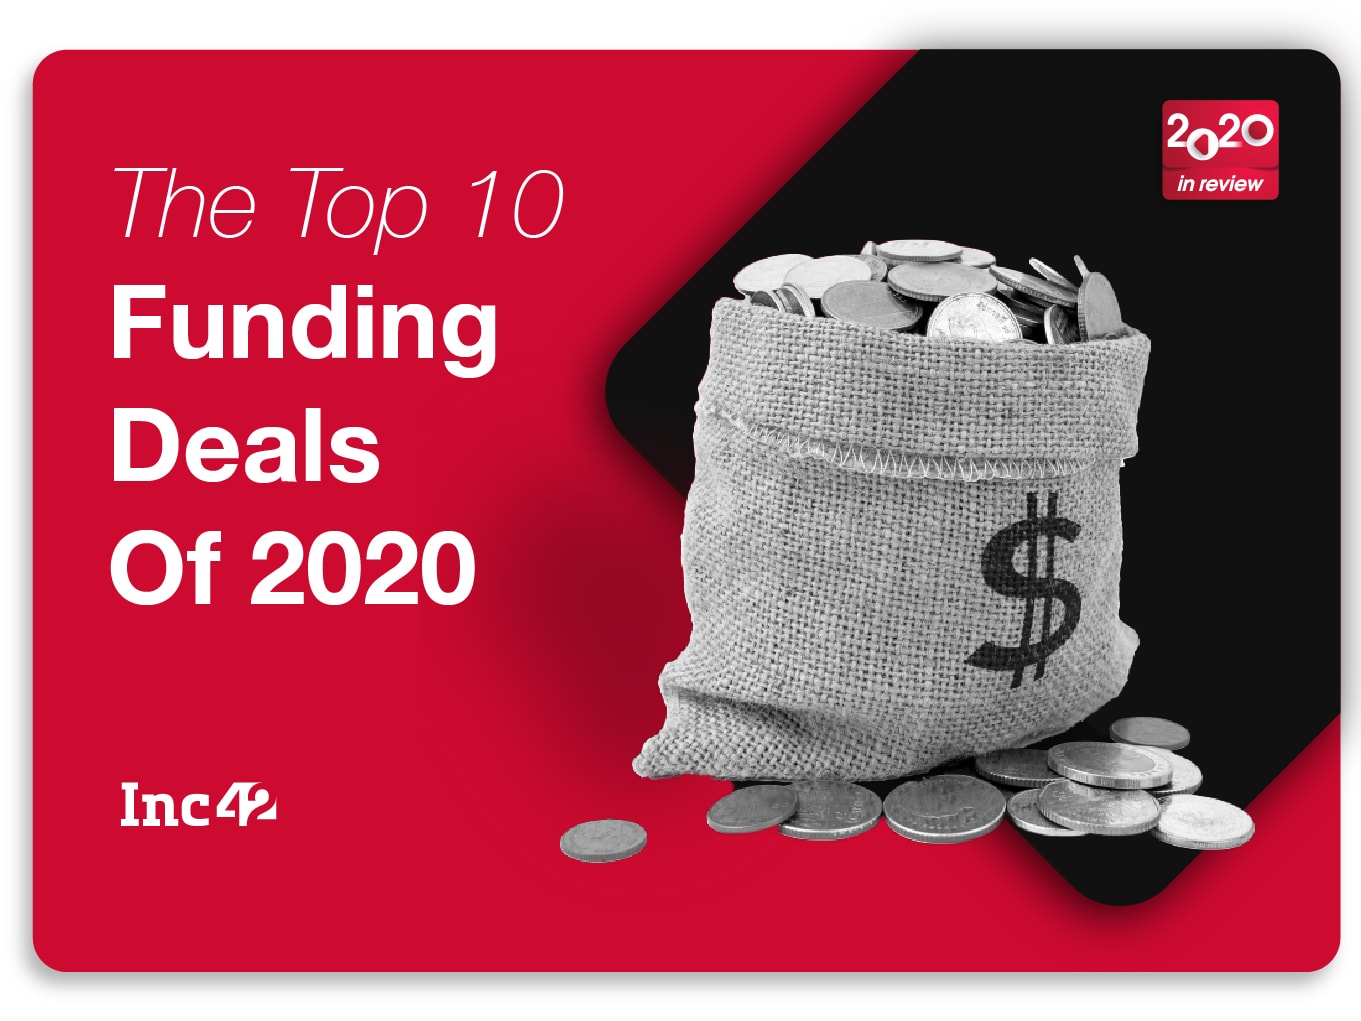 Year In Review: These Were The Top 10 Funding Deals Of 2020